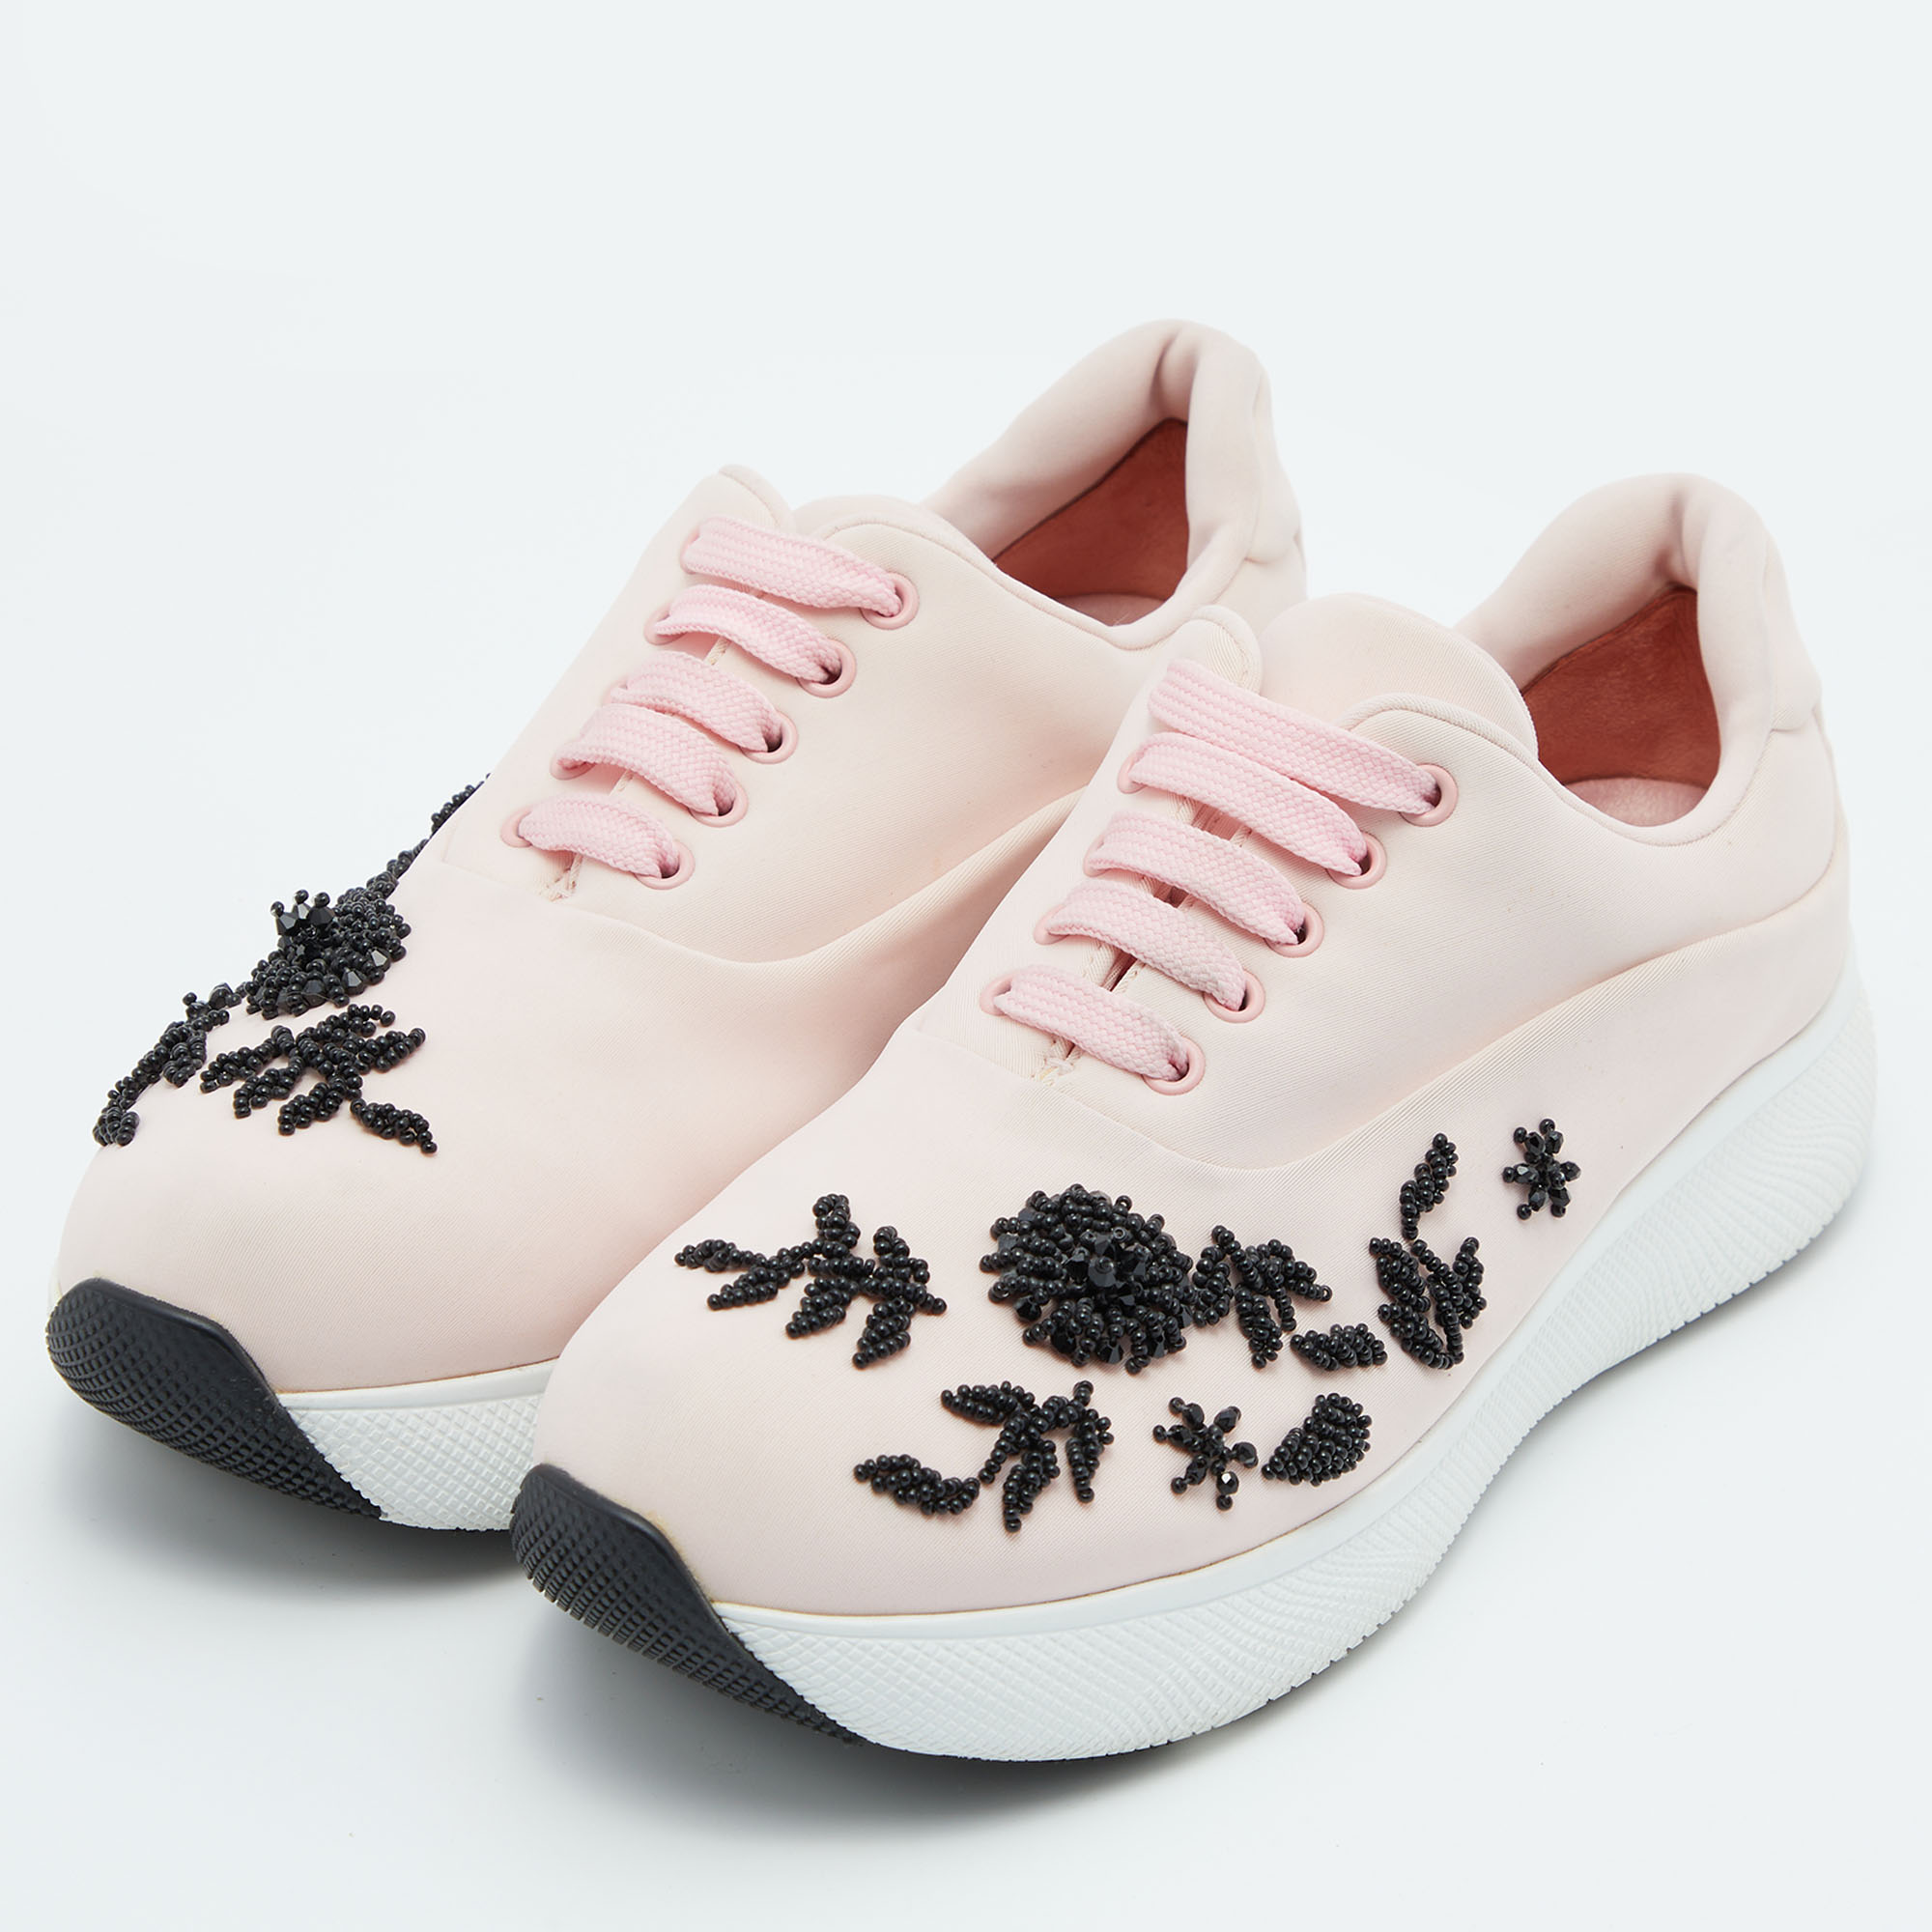 

Prada Pink Neoprene Beads Embellished Cloudbust Lace Up Sneakers Size